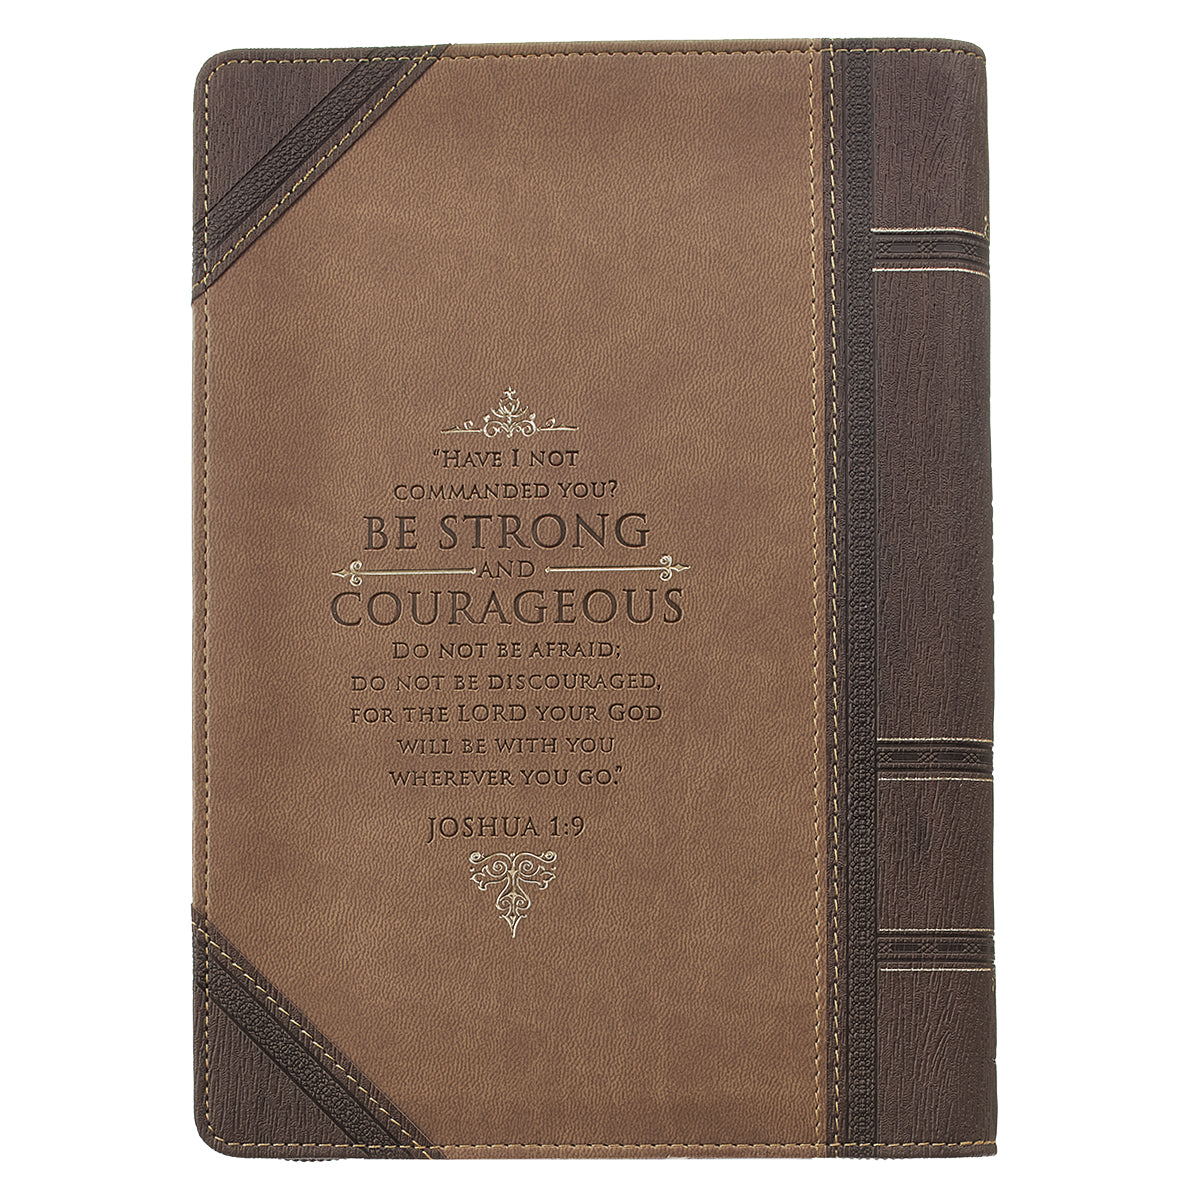 Image of Journal-Classic LuxLeather-Be Strong & Courageous-Brown/Tan w/Zipper other